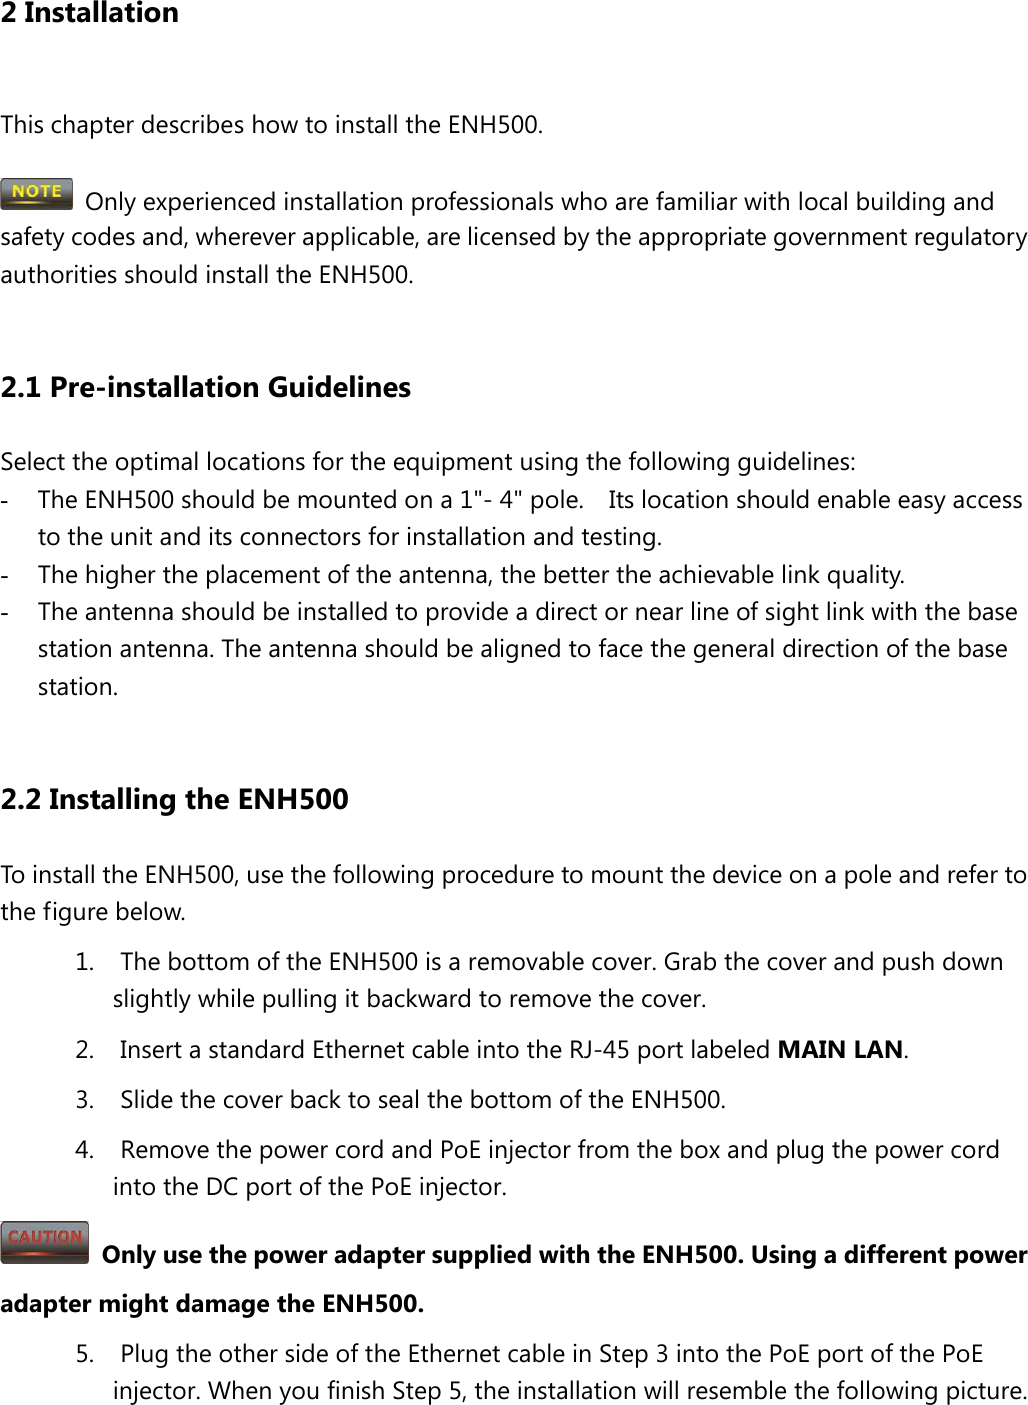 2 Installation  This chapter describes how to install the ENH500.   Only experienced installation professionals who are familiar with local building and safety codes and, wherever applicable, are licensed by the appropriate government regulatory authorities should install the ENH500.    2.1 Pre-installation Guidelines Select the optimal locations for the equipment using the following guidelines: - The ENH500 should be mounted on a 1&quot;- 4&quot; pole.    Its location should enable easy access to the unit and its connectors for installation and testing. - The higher the placement of the antenna, the better the achievable link quality. - The antenna should be installed to provide a direct or near line of sight link with the base station antenna. The antenna should be aligned to face the general direction of the base station.  2.2 Installing the ENH500 To install the ENH500, use the following procedure to mount the device on a pole and refer to the figure below. 1. The bottom of the ENH500 is a removable cover. Grab the cover and push down slightly while pulling it backward to remove the cover. 2. Insert a standard Ethernet cable into the RJ-45 port labeled MAIN LAN. 3. Slide the cover back to seal the bottom of the ENH500. 4. Remove the power cord and PoE injector from the box and plug the power cord into the DC port of the PoE injector.  Only use the power adapter supplied with the ENH500. Using a different power adapter might damage the ENH500. 5. Plug the other side of the Ethernet cable in Step 3 into the PoE port of the PoE injector. When you finish Step 5, the installation will resemble the following picture. 